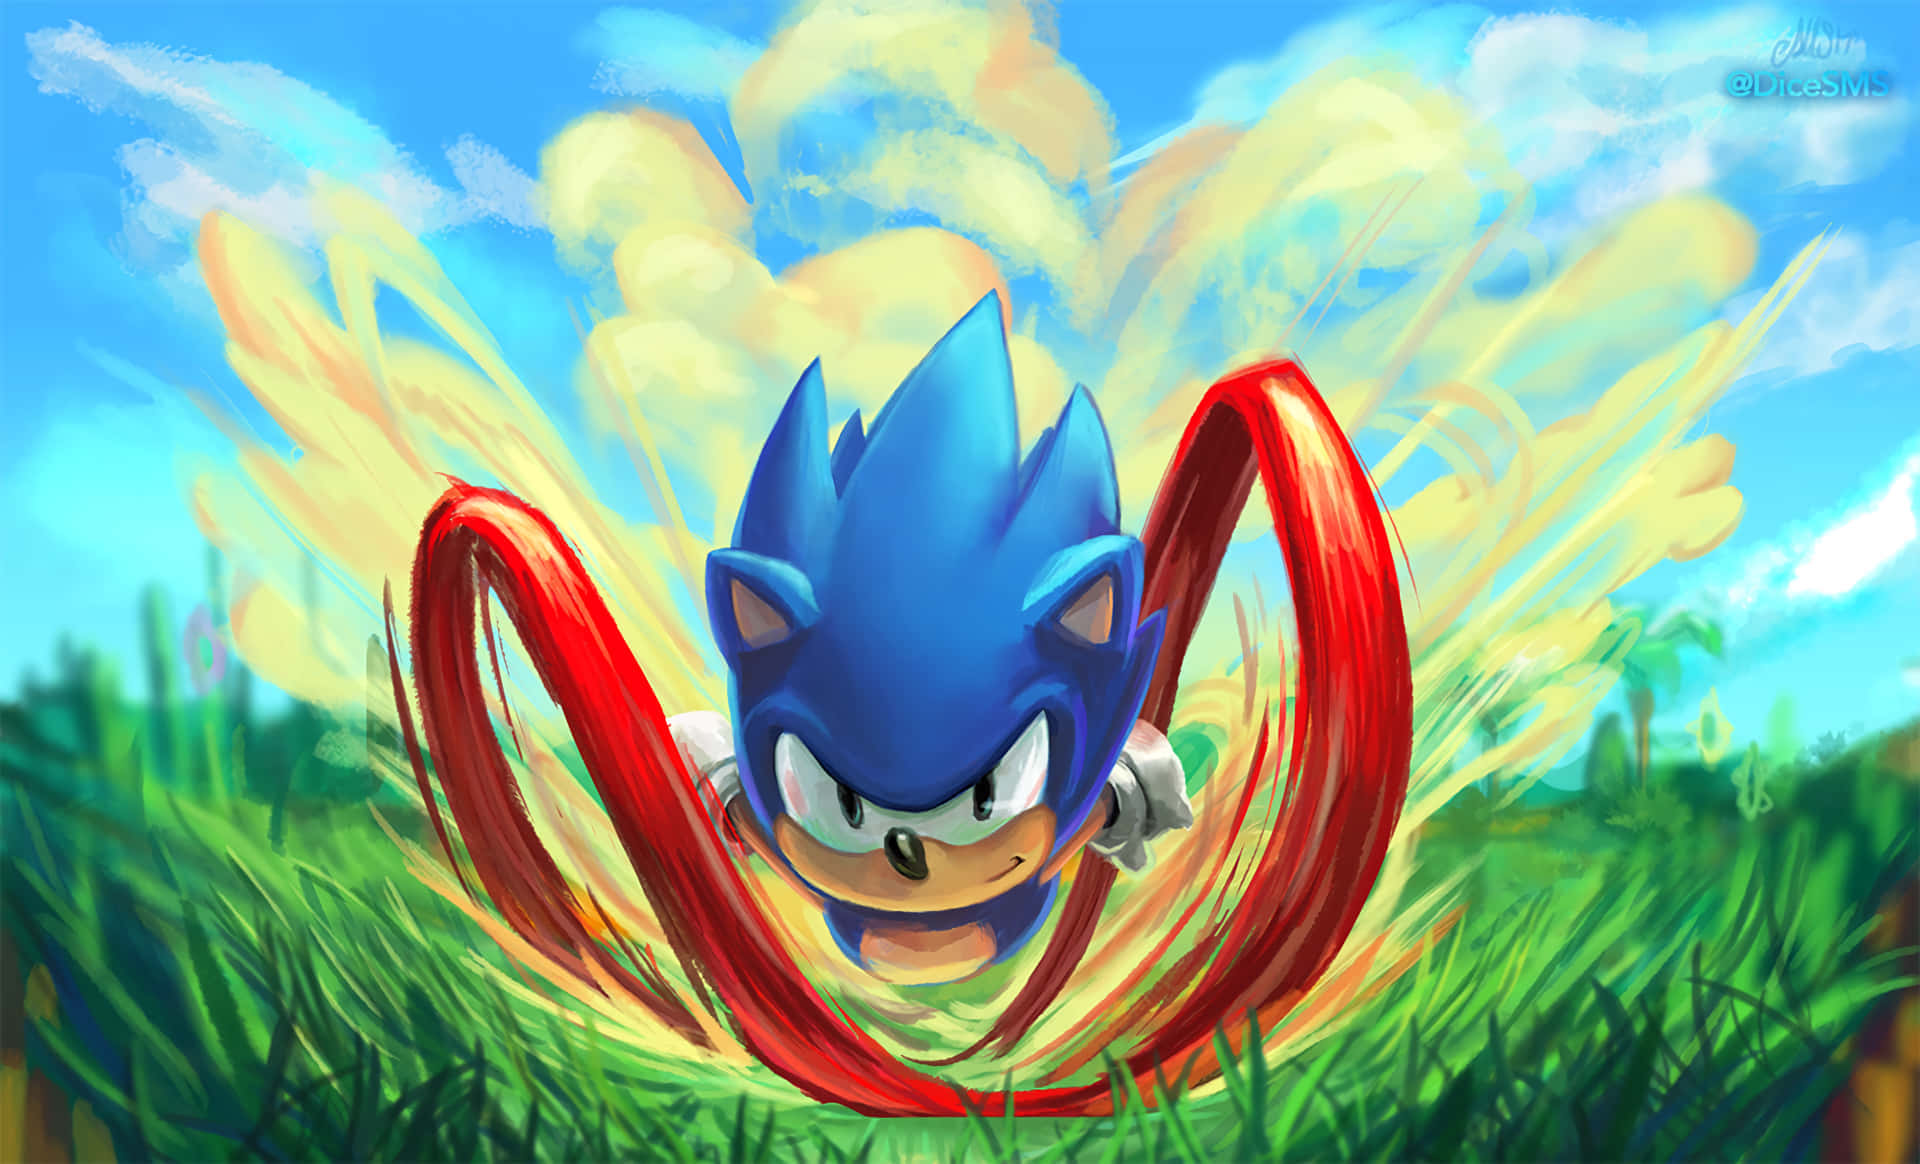 Classic Sonic Running Fast in Green Hill Zone Wallpaper